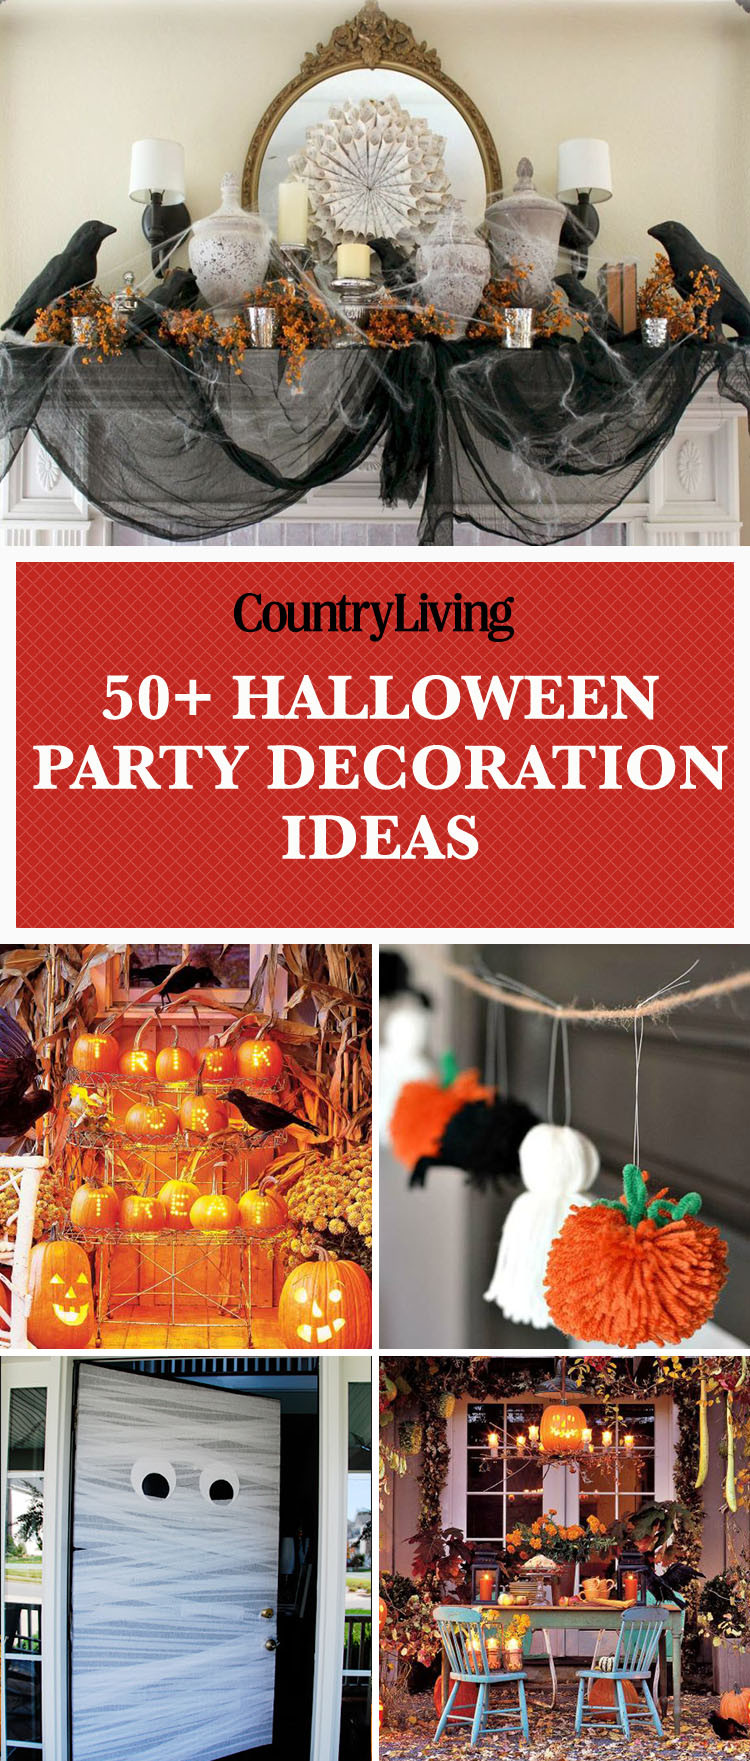 Halloween Decoration Ideas For Party
 56 Fun Halloween Party Decorating Ideas Spooky Halloween